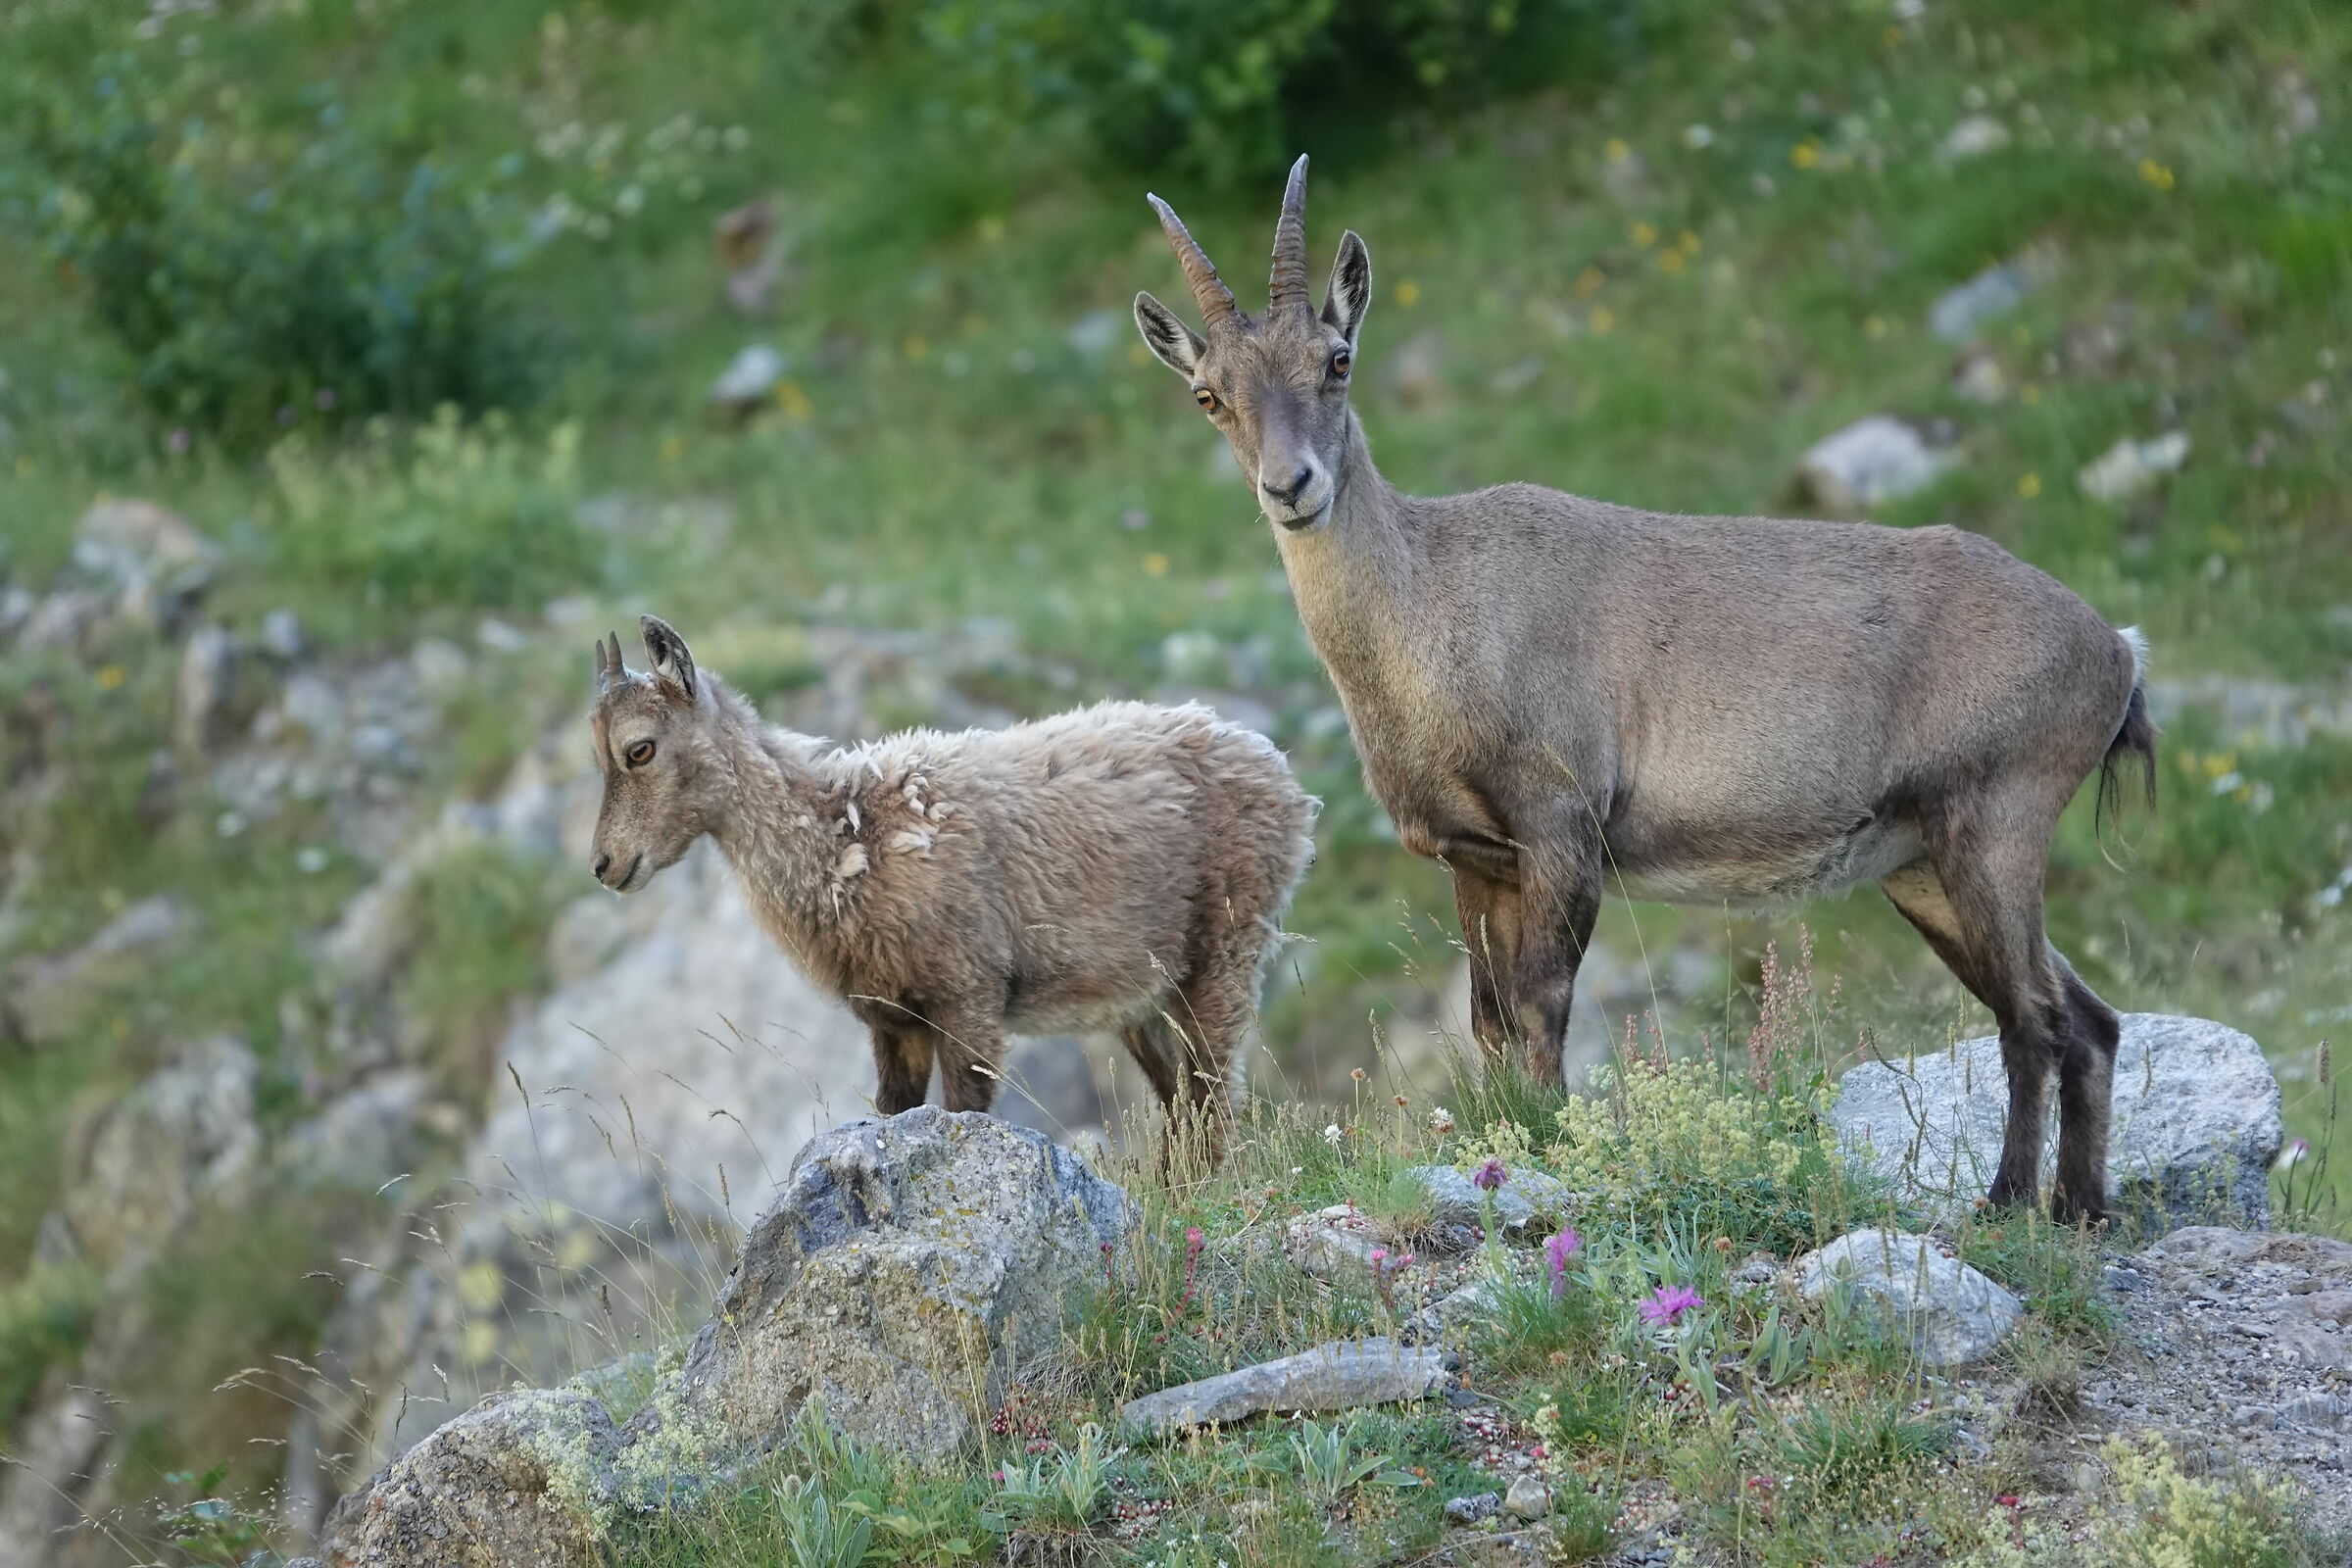 Mom ibex with puppy...